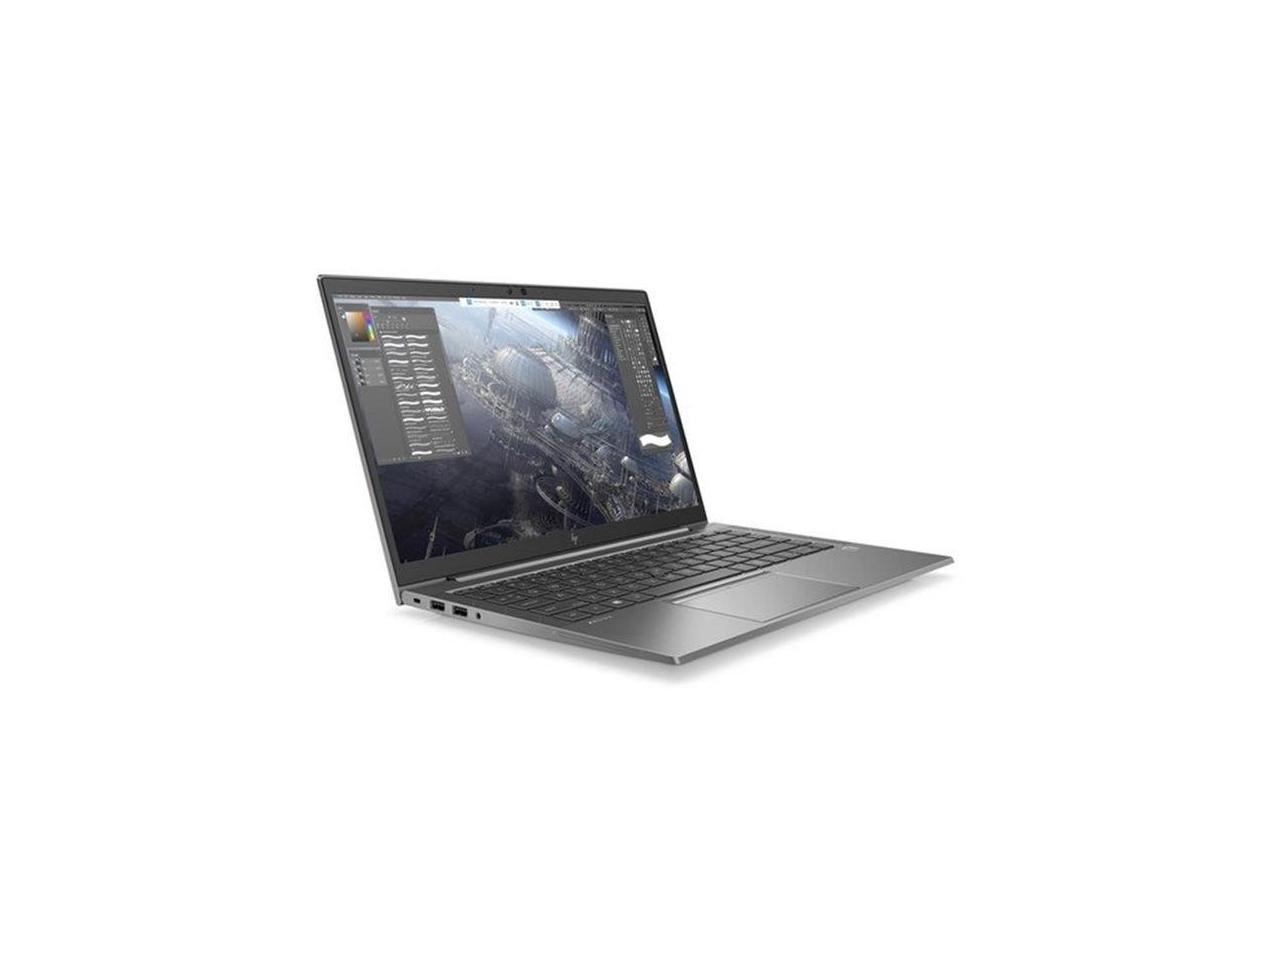 HP ZBook Firefly 14 G7 14" Mobile Workstation - Intel Core i7 (10th Gen) i7-10610U Quad-core (4 Core) 1.80 GHz - 32 GB RAM - 1 TB SSD - Windows 10 Pro - NVIDIA Quadro P520 with 4 GB, Intel UHD Gr